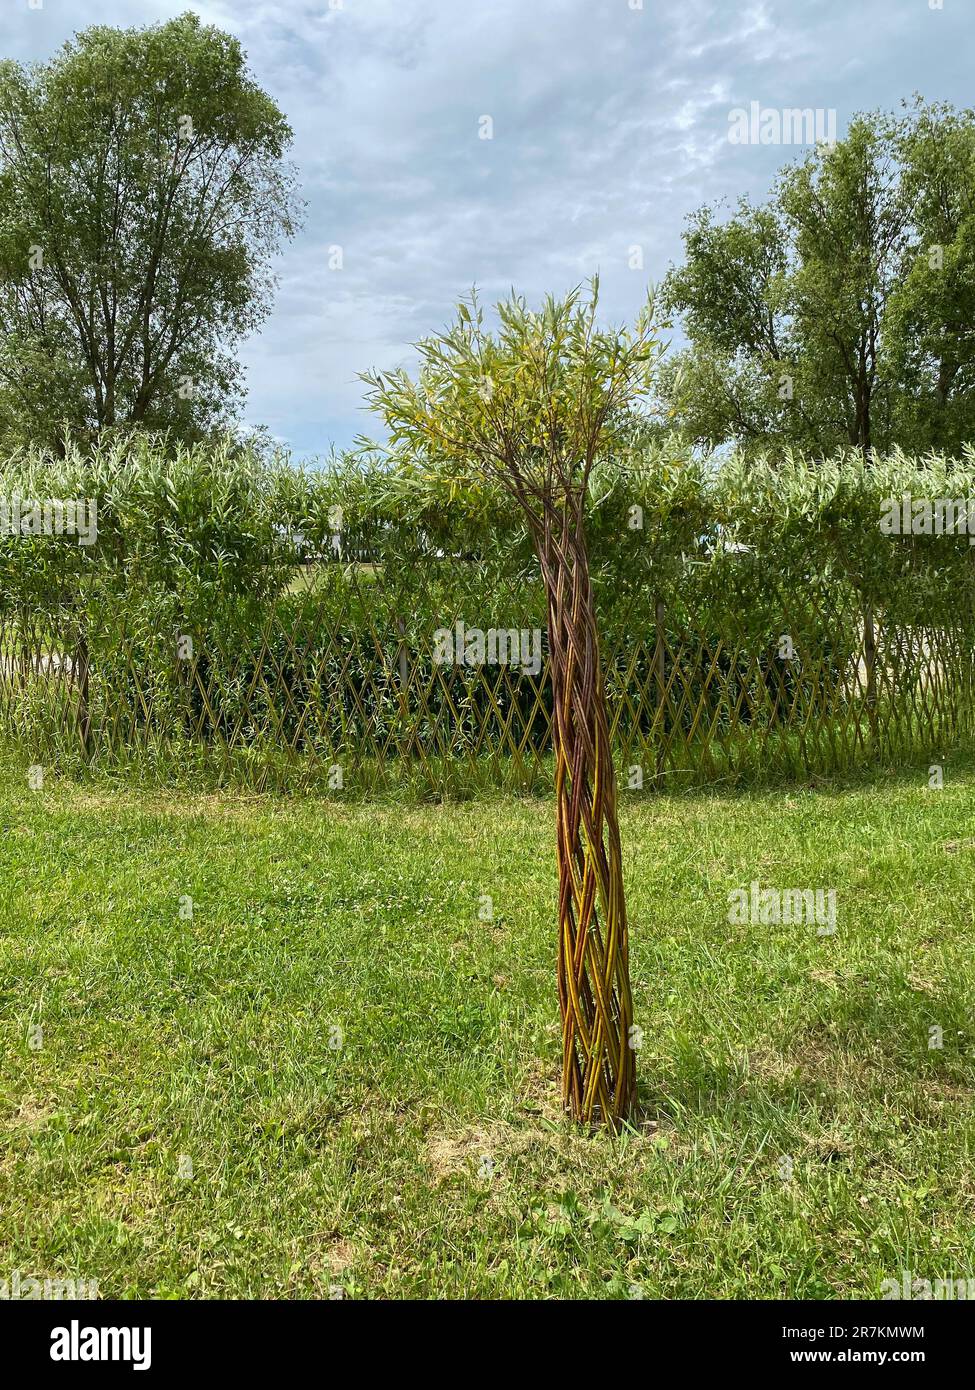 Living willow structure and fedge in the garden or park. Concept of landscape design, vertical gardening Stock Photo